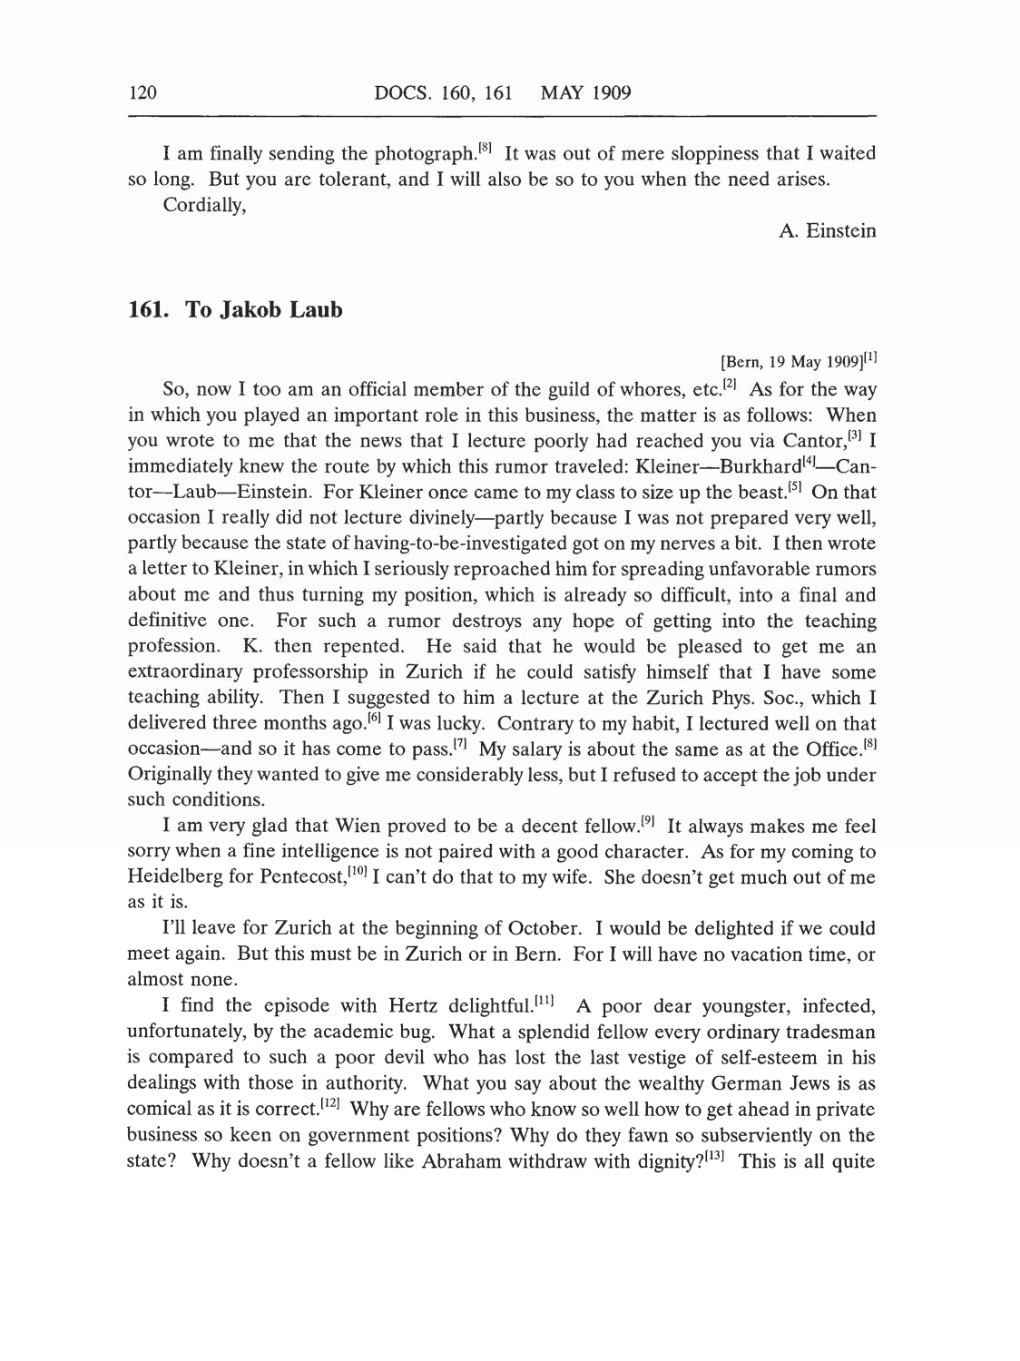 Volume 5: The Swiss Years: Correspondence, 1902-1914 (English translation supplement) page 120